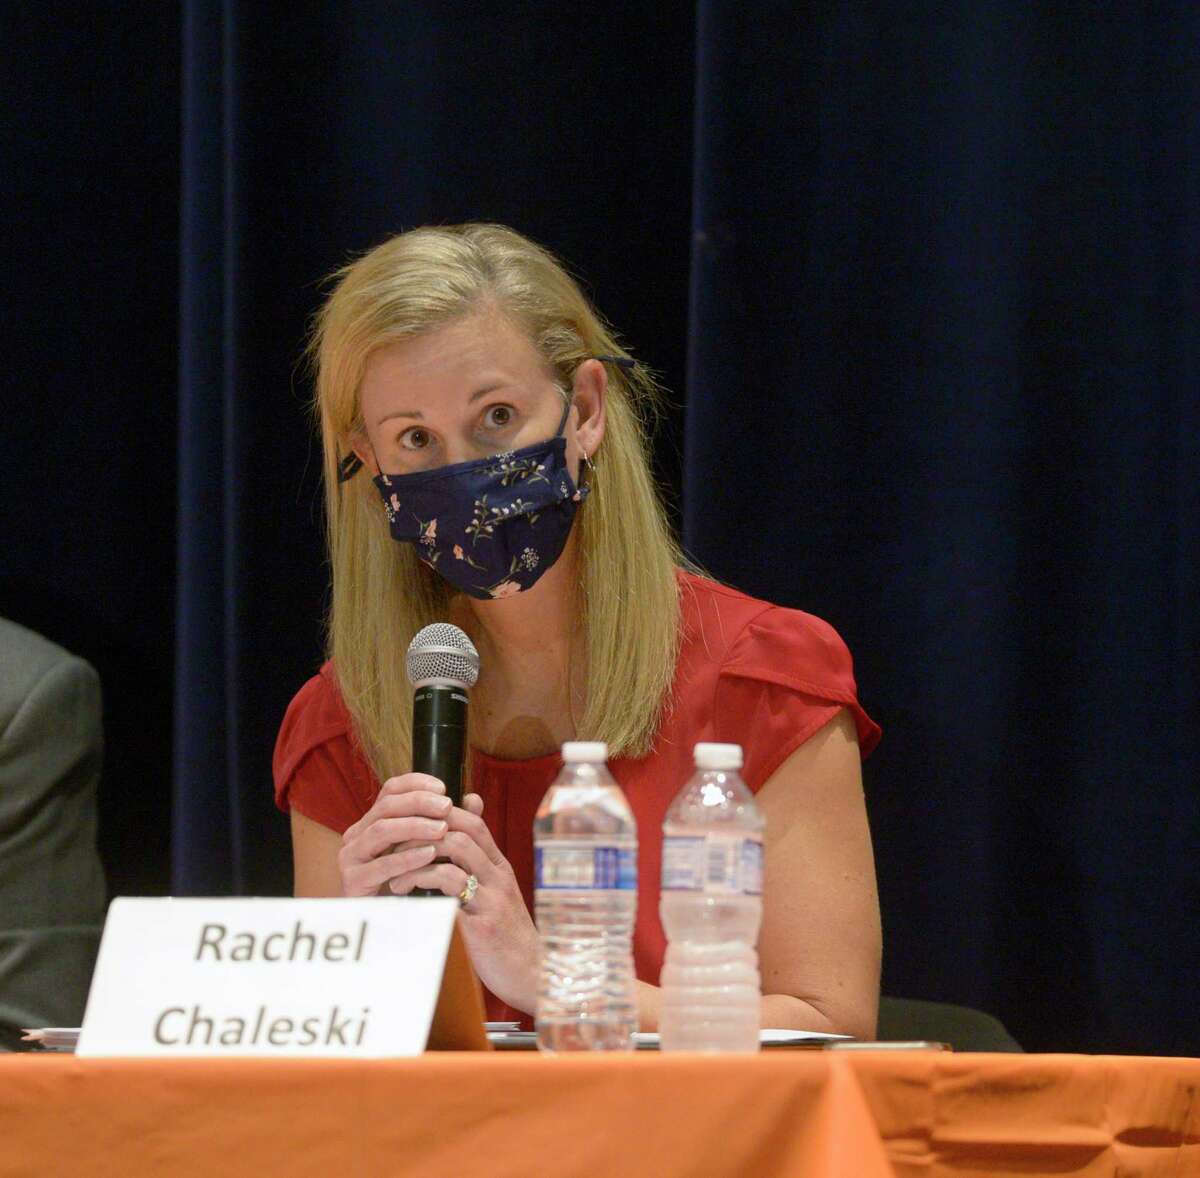 School board candidate Republican Rachel Chaleski speaks during the Danbury City-Wide PTO candidate forum at Danbury High School. Wednesday night, October 6, 2021, Danbury, Conn. Chaleski has been named the new chair of the school board.